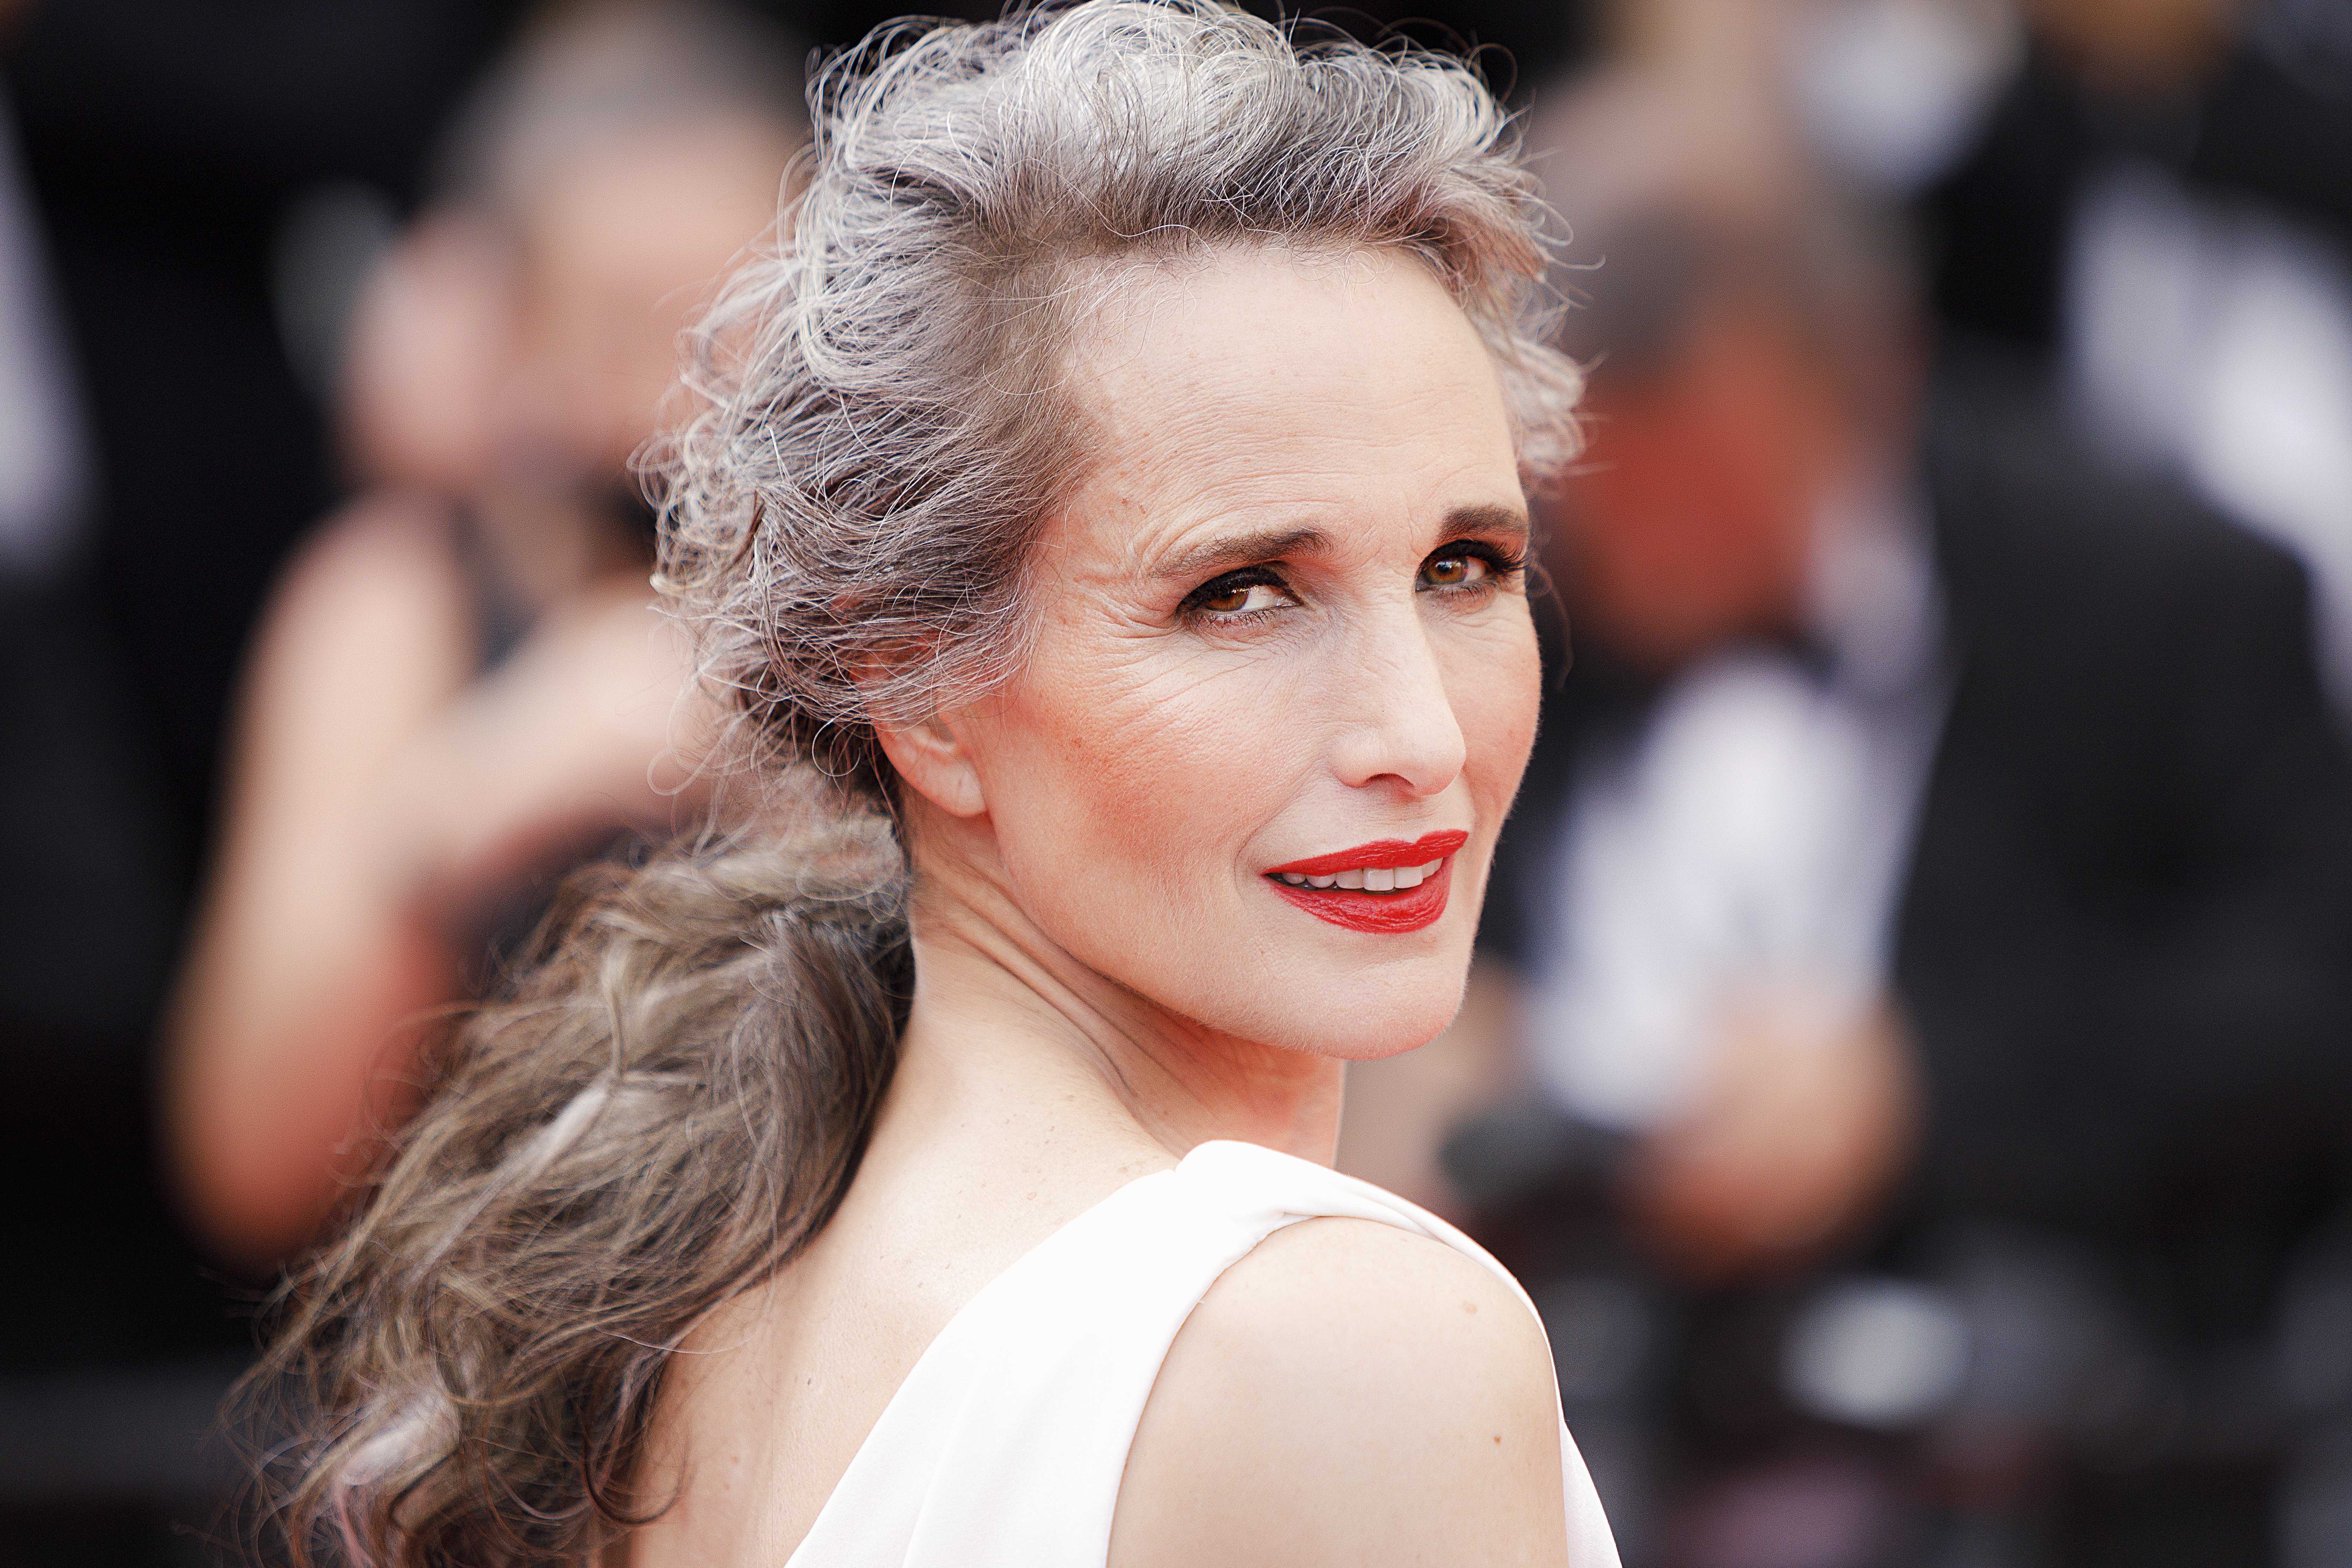 Andie MacDowell in Cannes, France on July 7, 2021 | Source: Getty Images